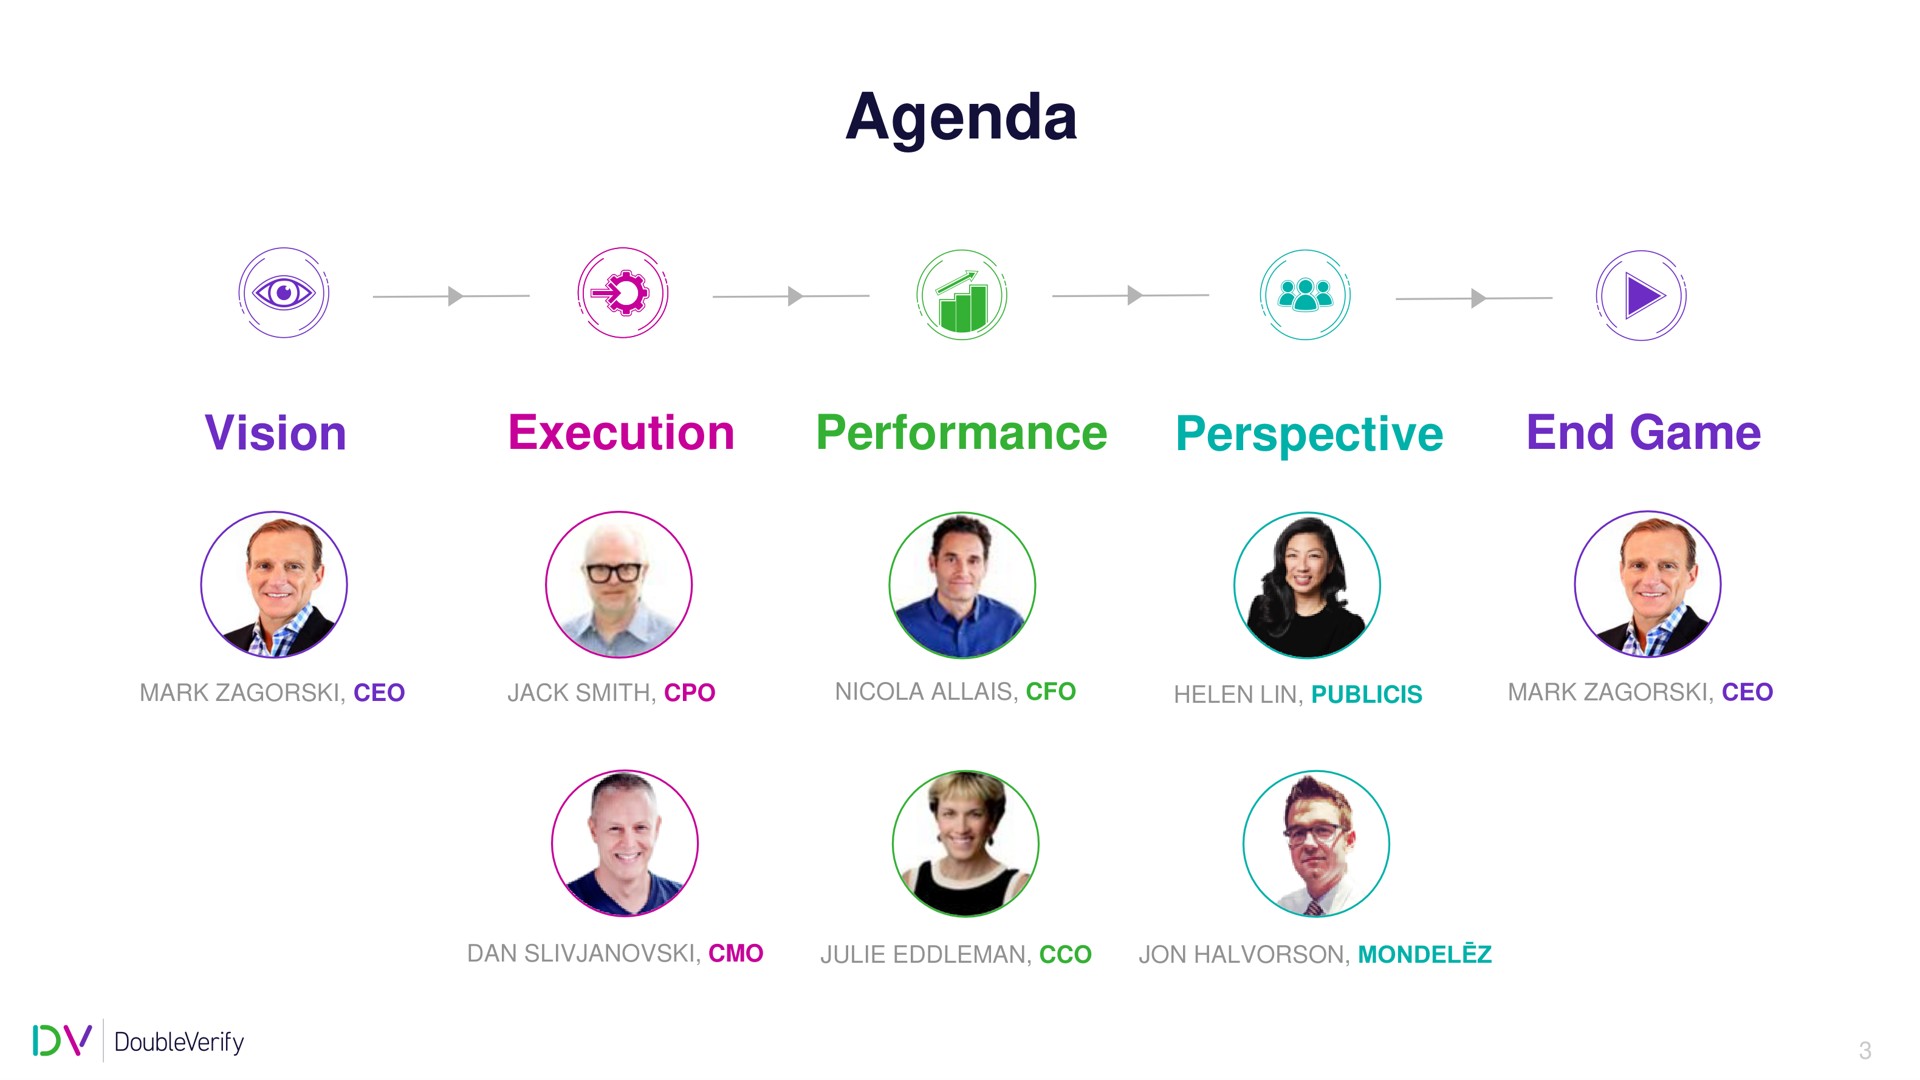 agenda vision execution performance perspective end game | DoubleVerify